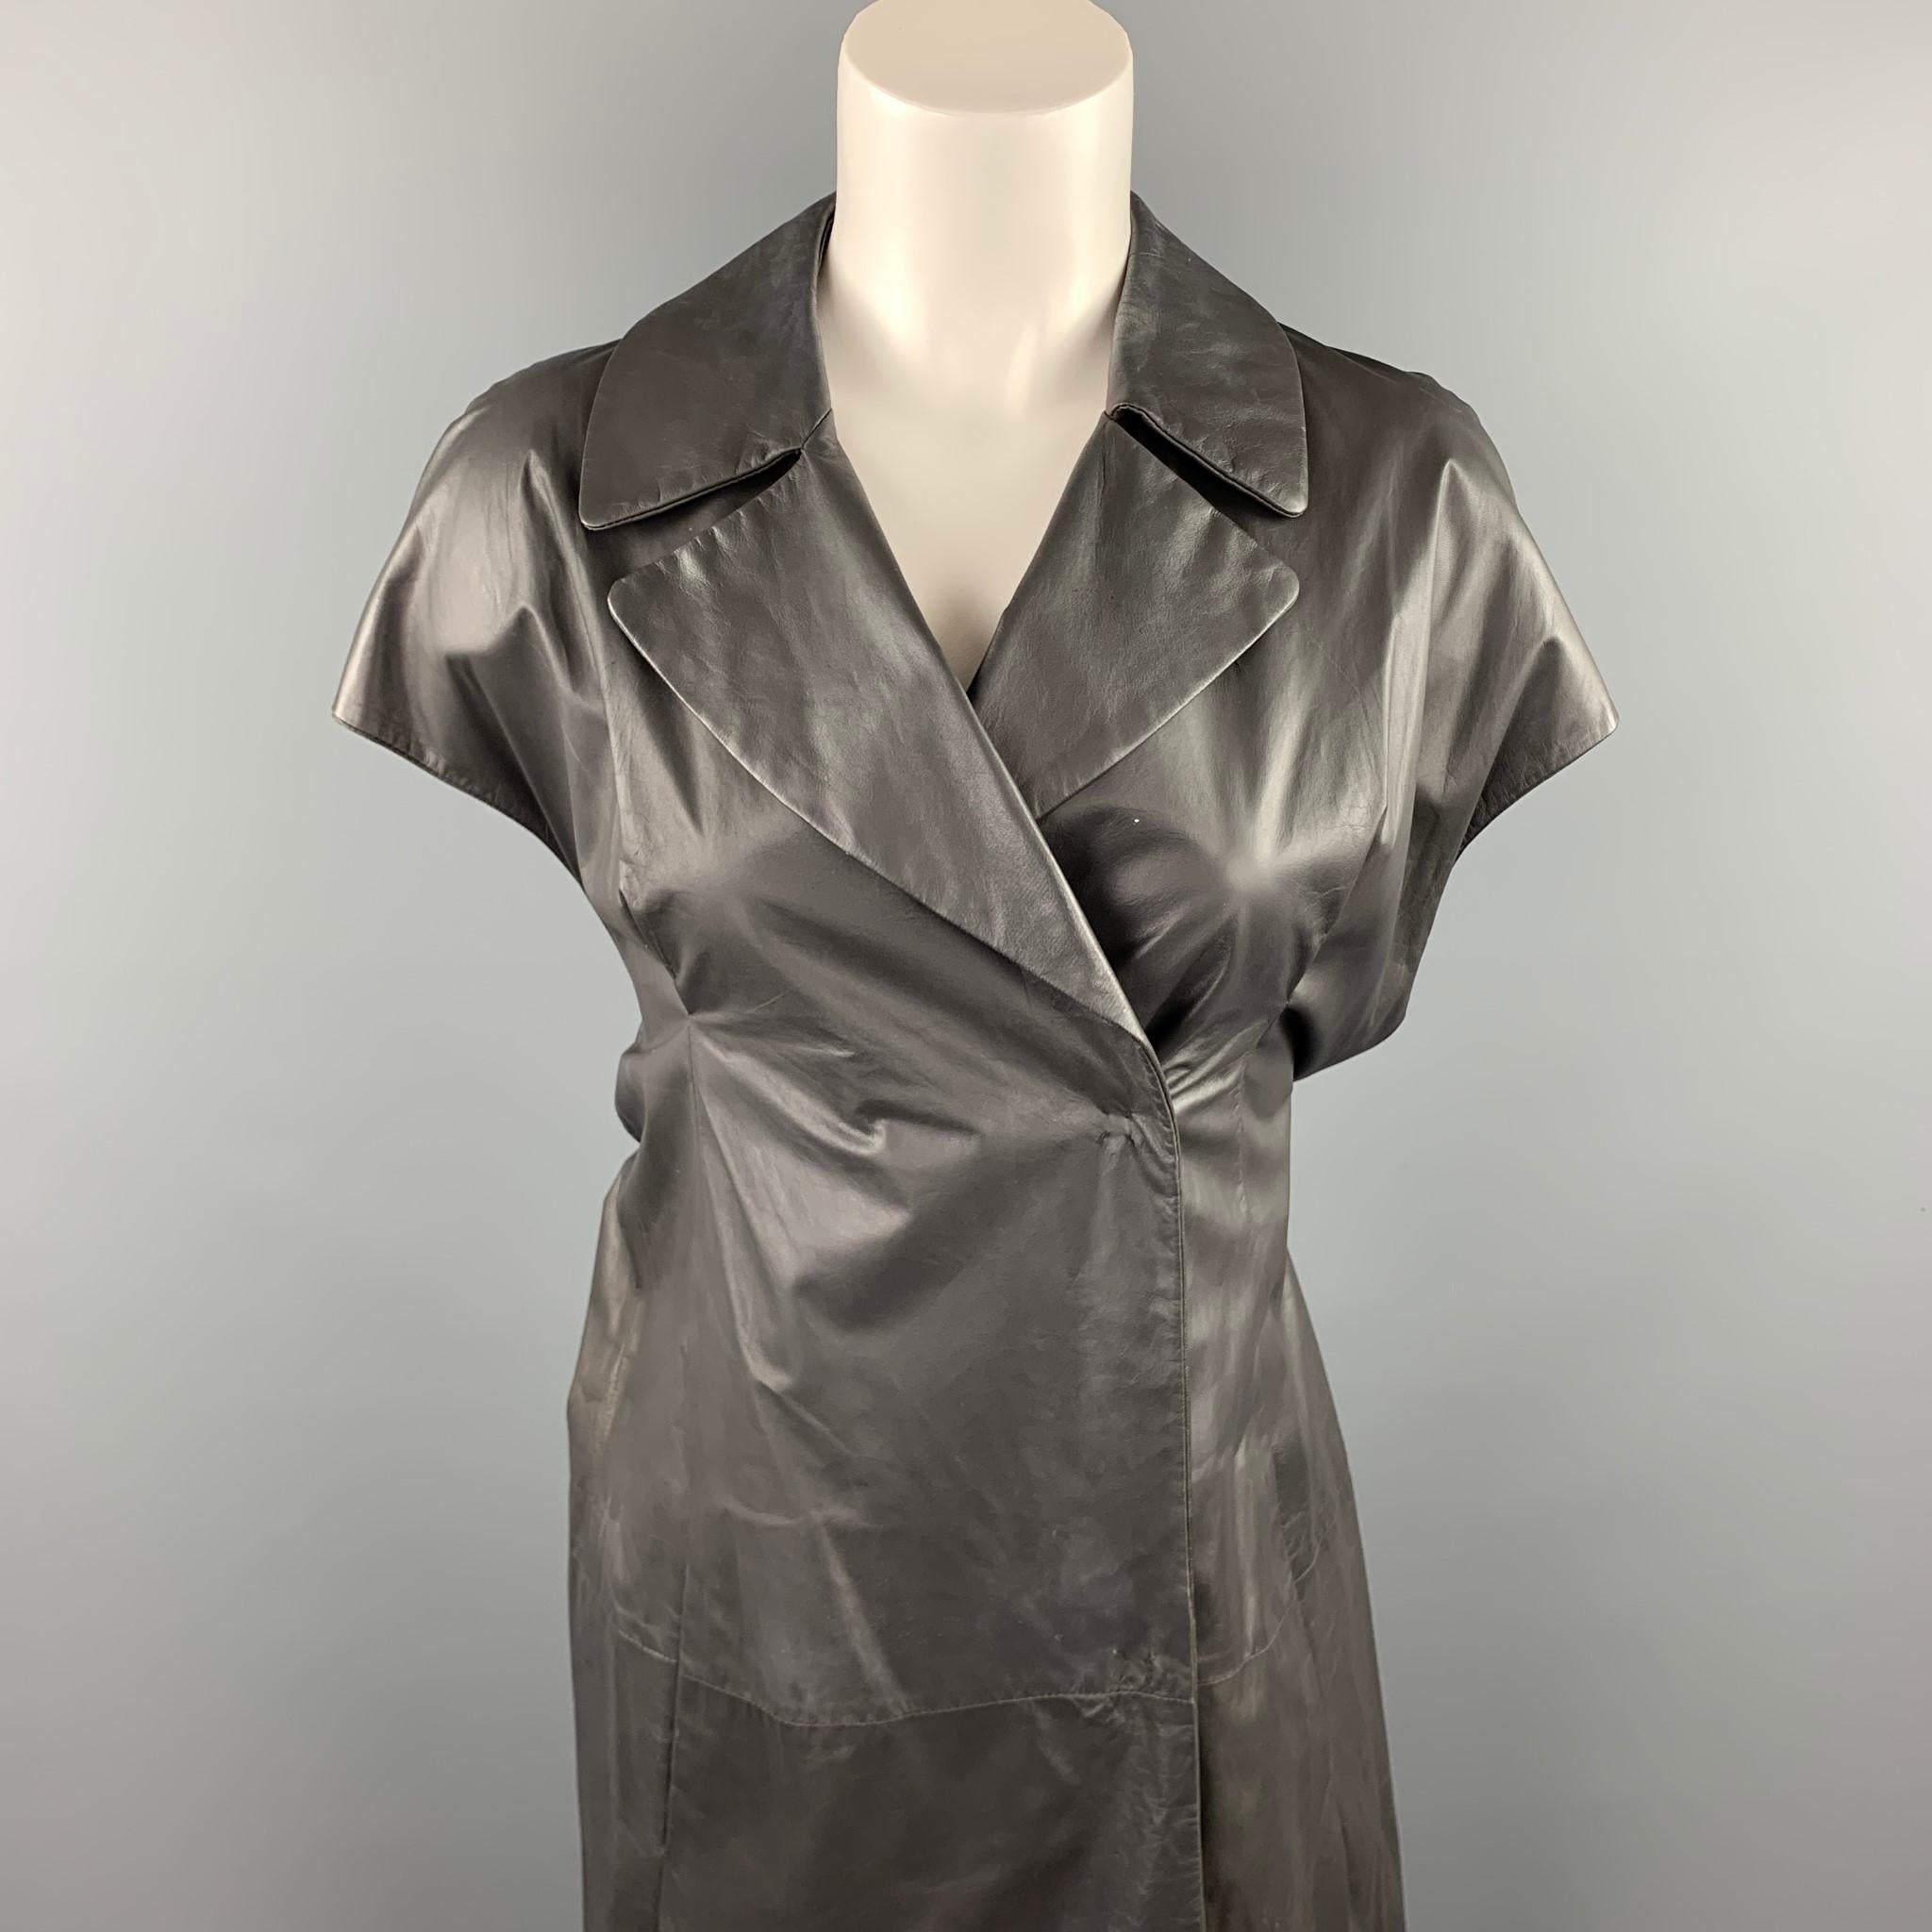 MARNI vest comes in a grey leather featuring a notch lapel, slit pockets, back belt, and a double breasted closure. Minor wear. As-Is. Made in Italy.

Good Pre-Owned Condition.
Marked: IT 40

Measurements:

Shoulder: 17.5 in. 
Bust: 34 in. 
Sleeve: